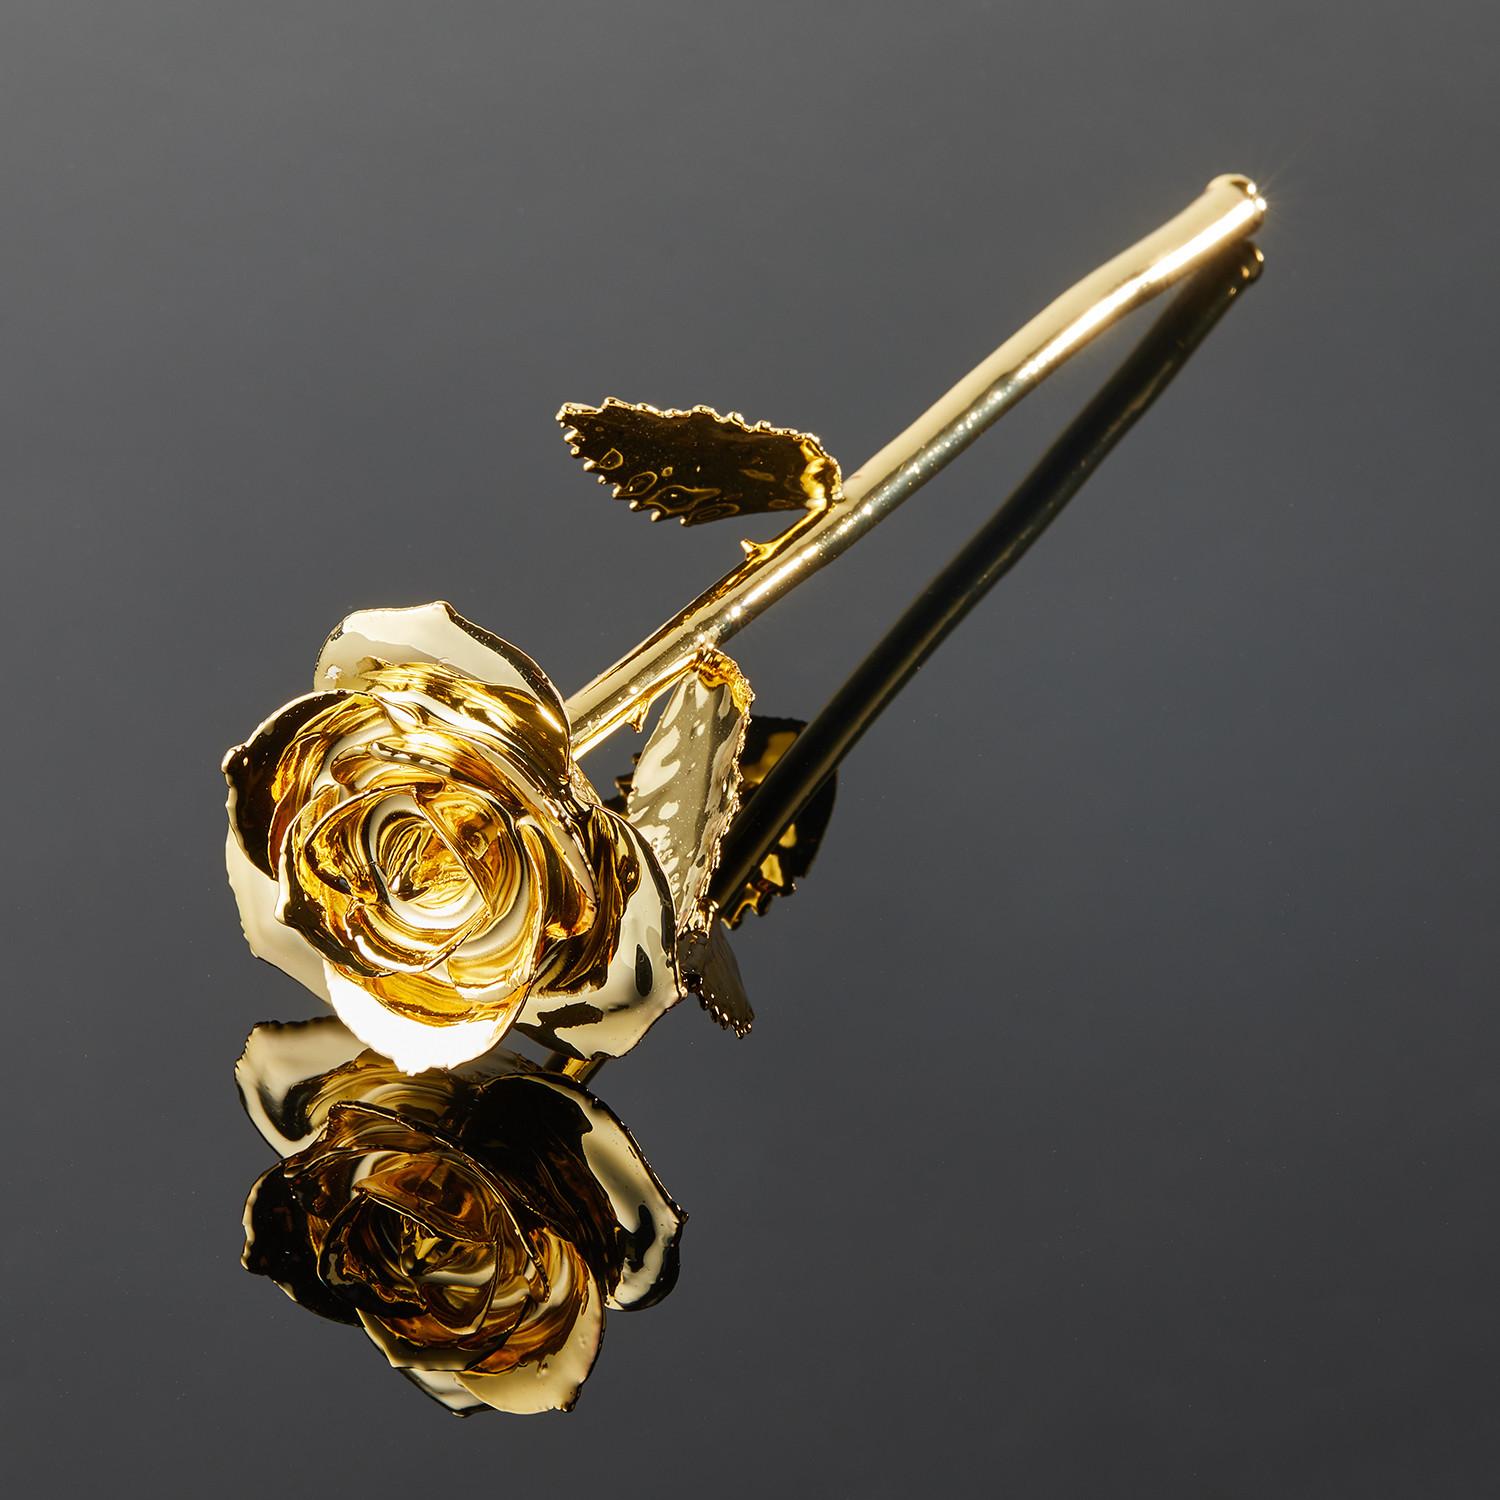 Meaning Behind The Rose. Our Wedding Bliss Eternal Rose is a frosted beauty, perfect for celebrating matrimony and brightening anyone’s day. This spectacular real rose was picked when perfect and then carefully preserved in 24k gold with a glossy